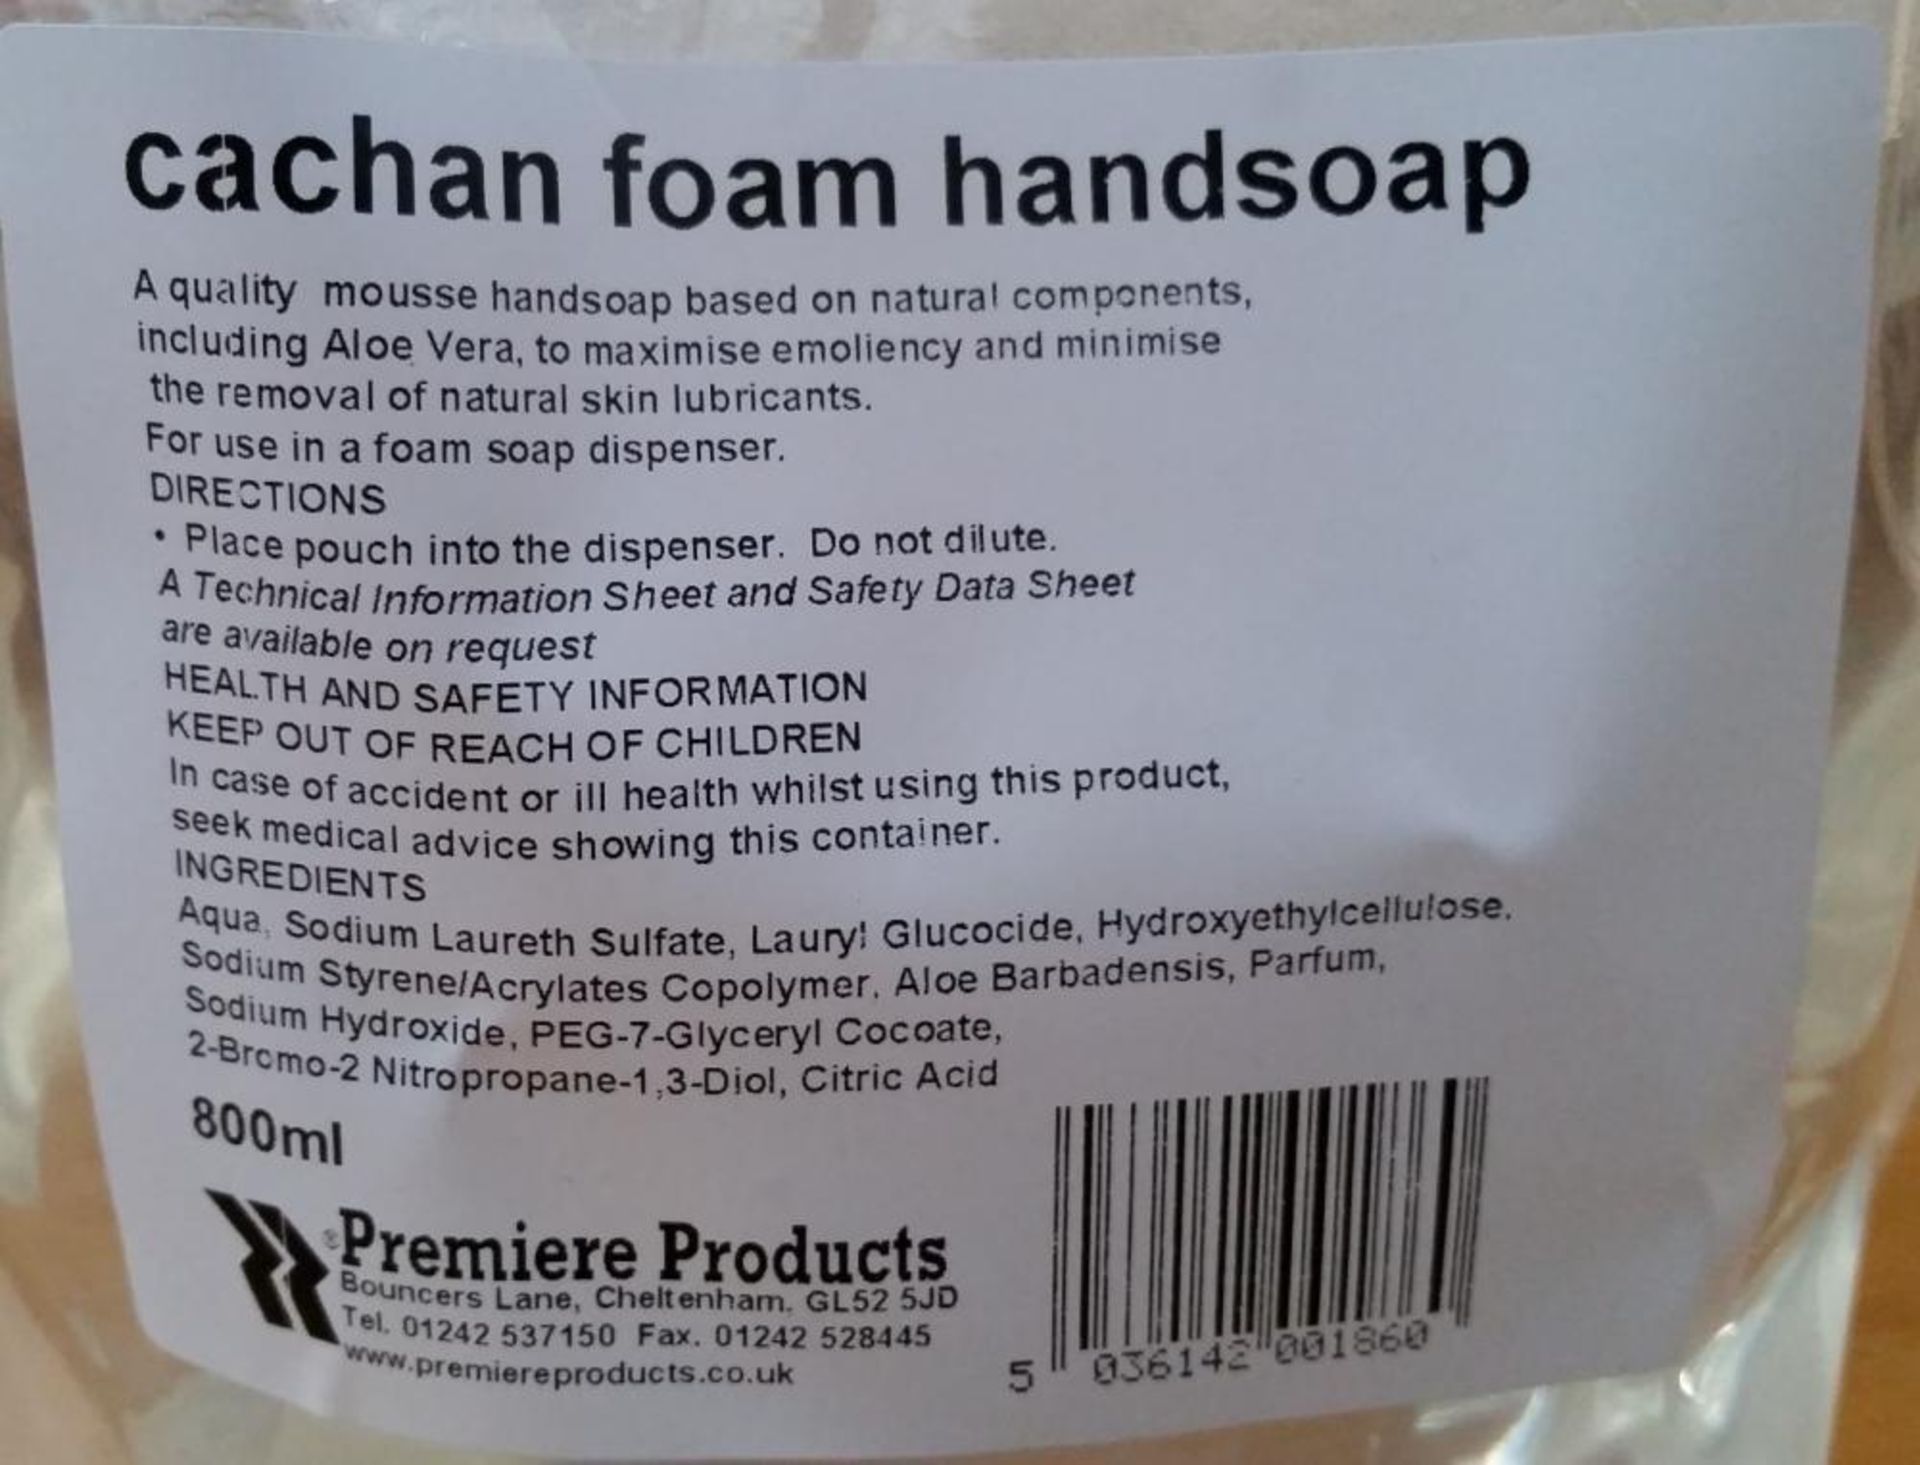 24 x Cachan Foam 800ml Handwash - Suitable For Foaming Dispnesers - Expiry December 2018 - Includes - Image 3 of 5